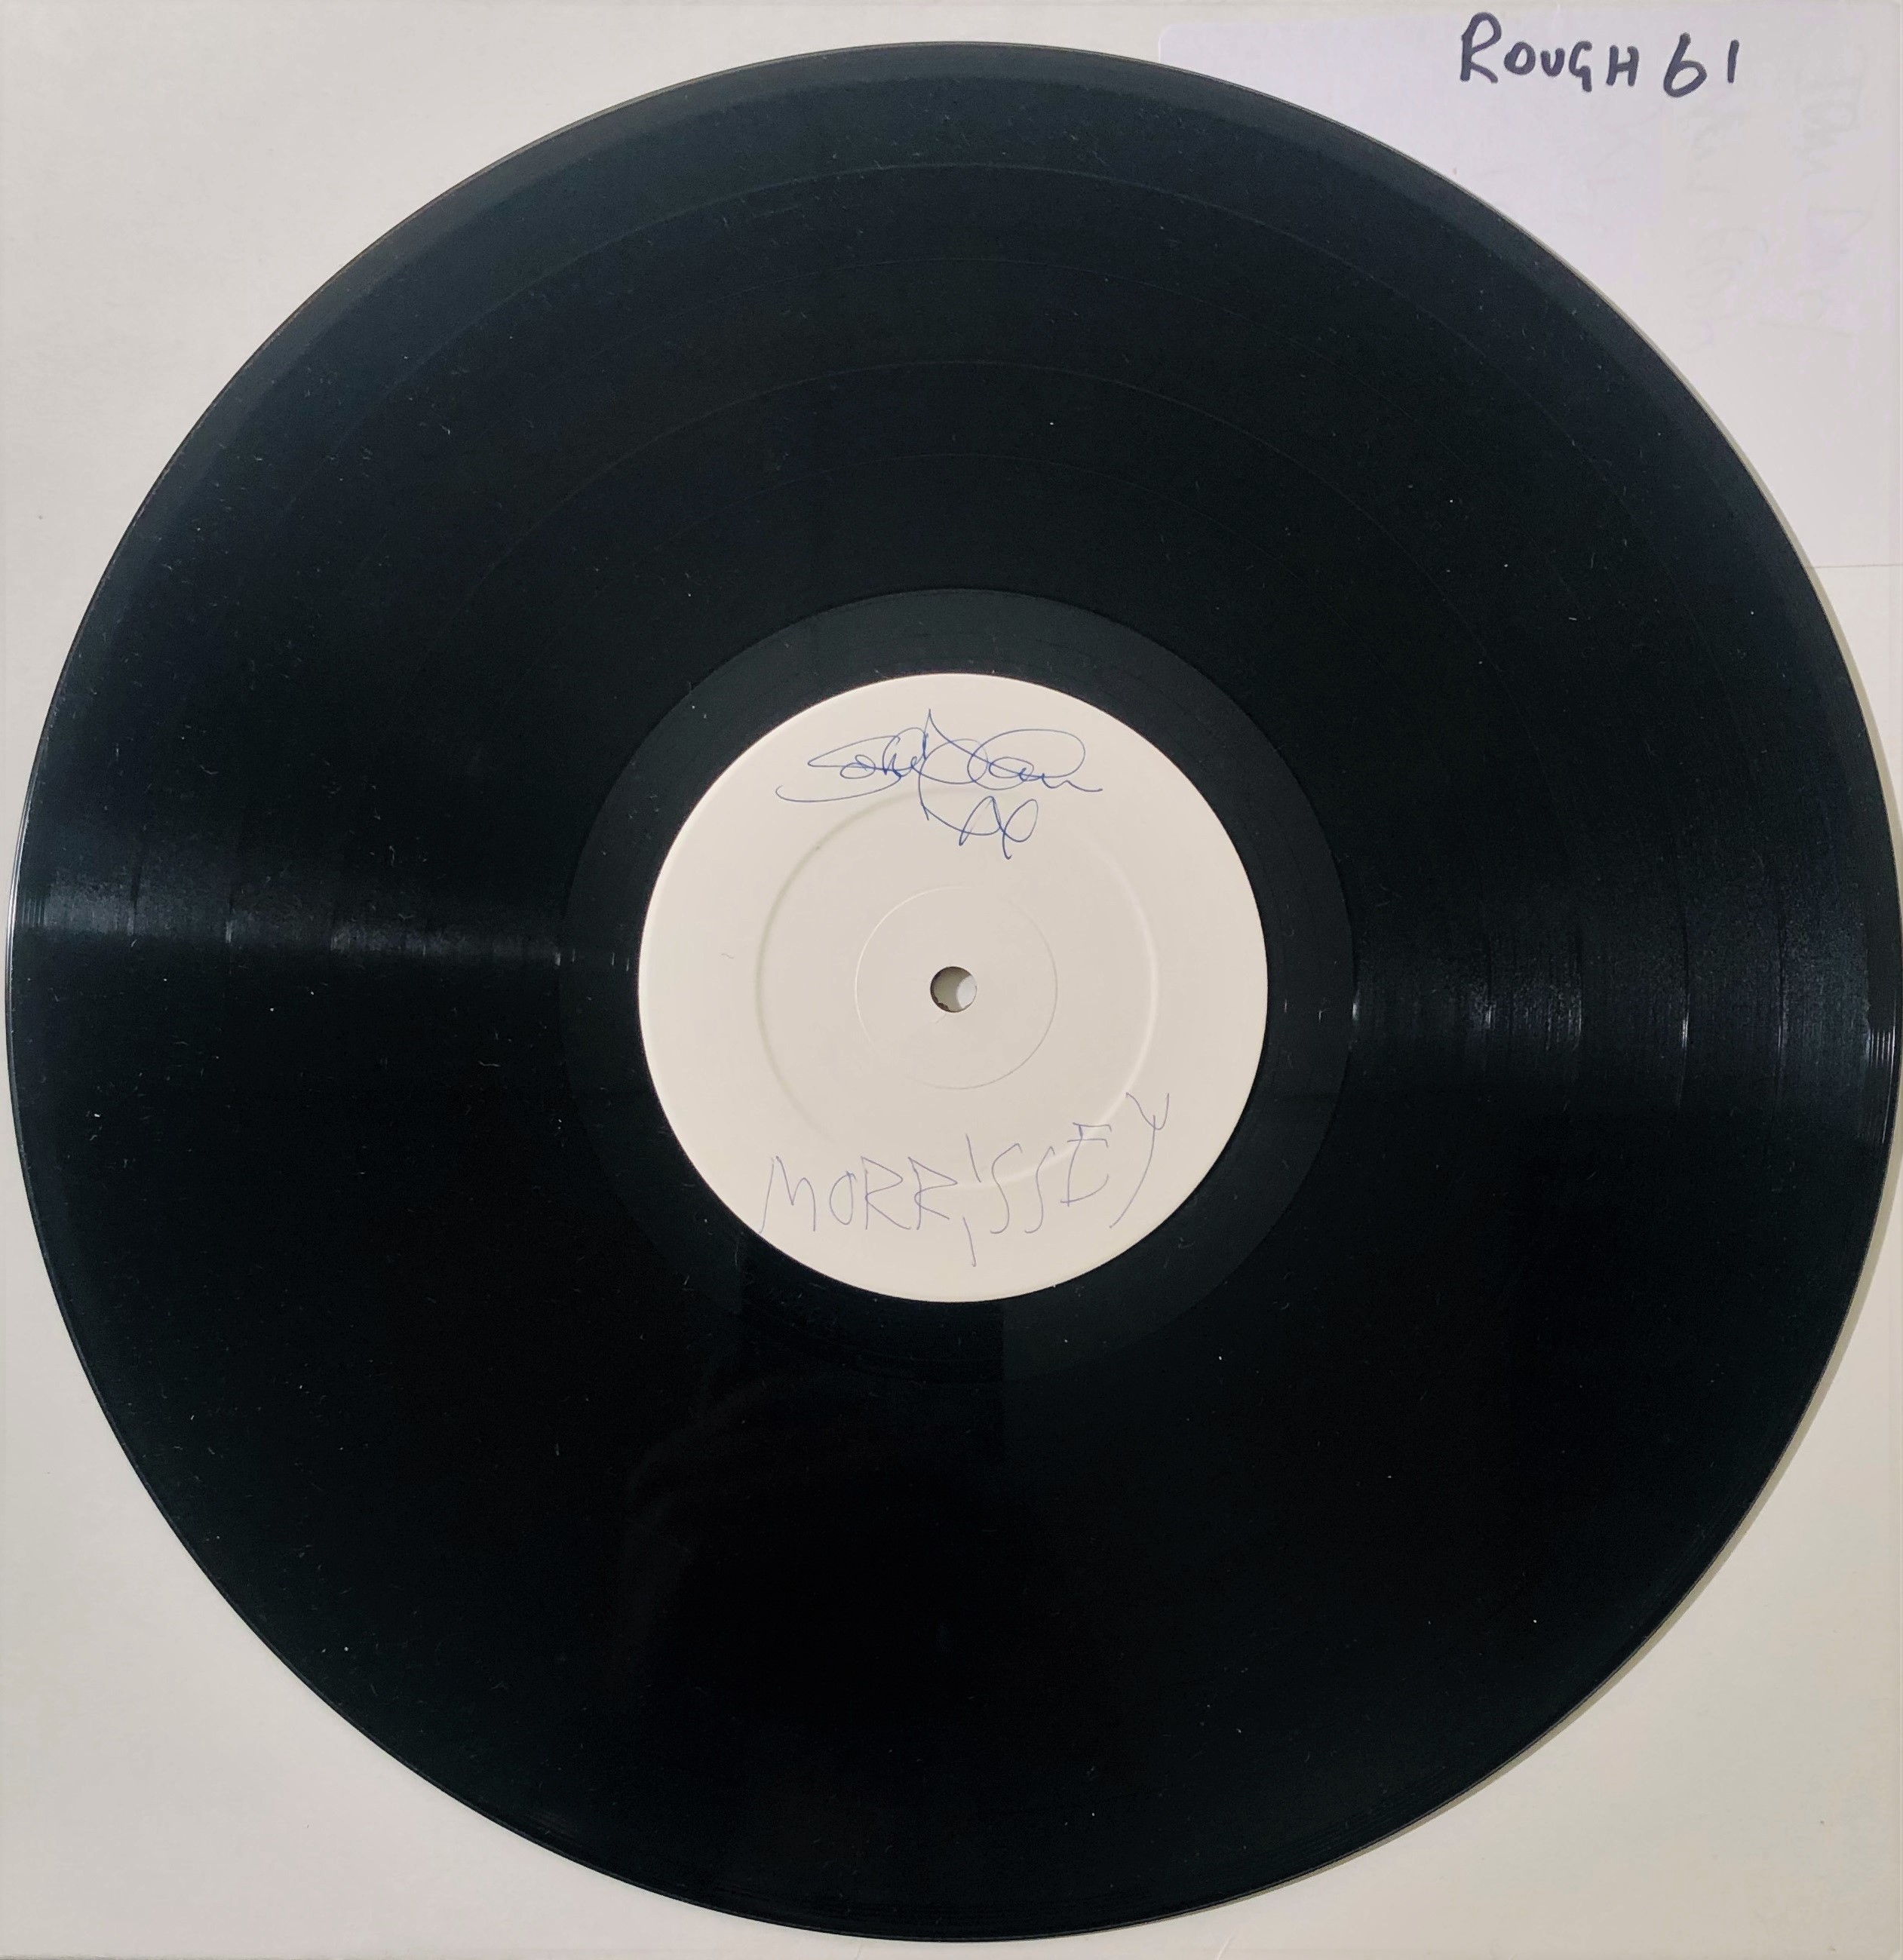 THE SMITHS SIGNED WHITE LABEL. - Image 3 of 3